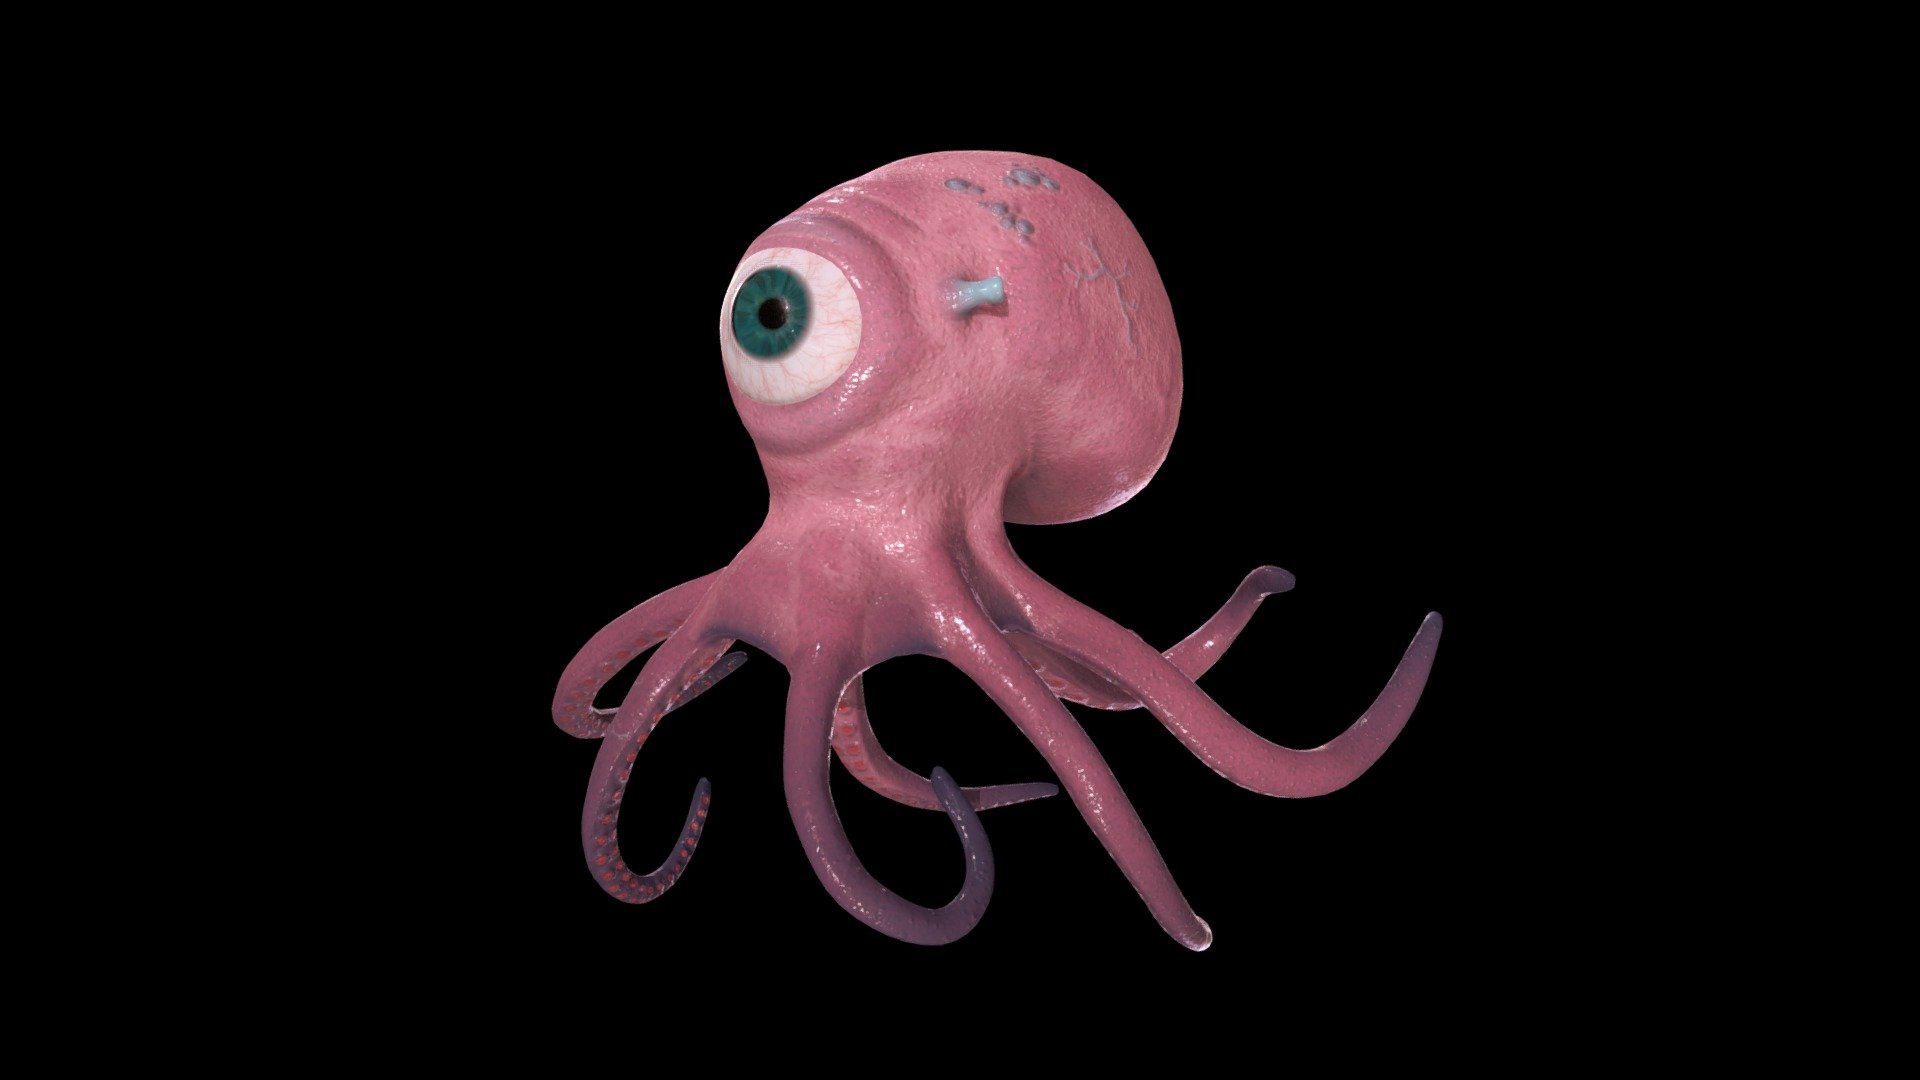 It's a kind of alien octopus that I decided to make with blender and substance painter just for fun 3d model